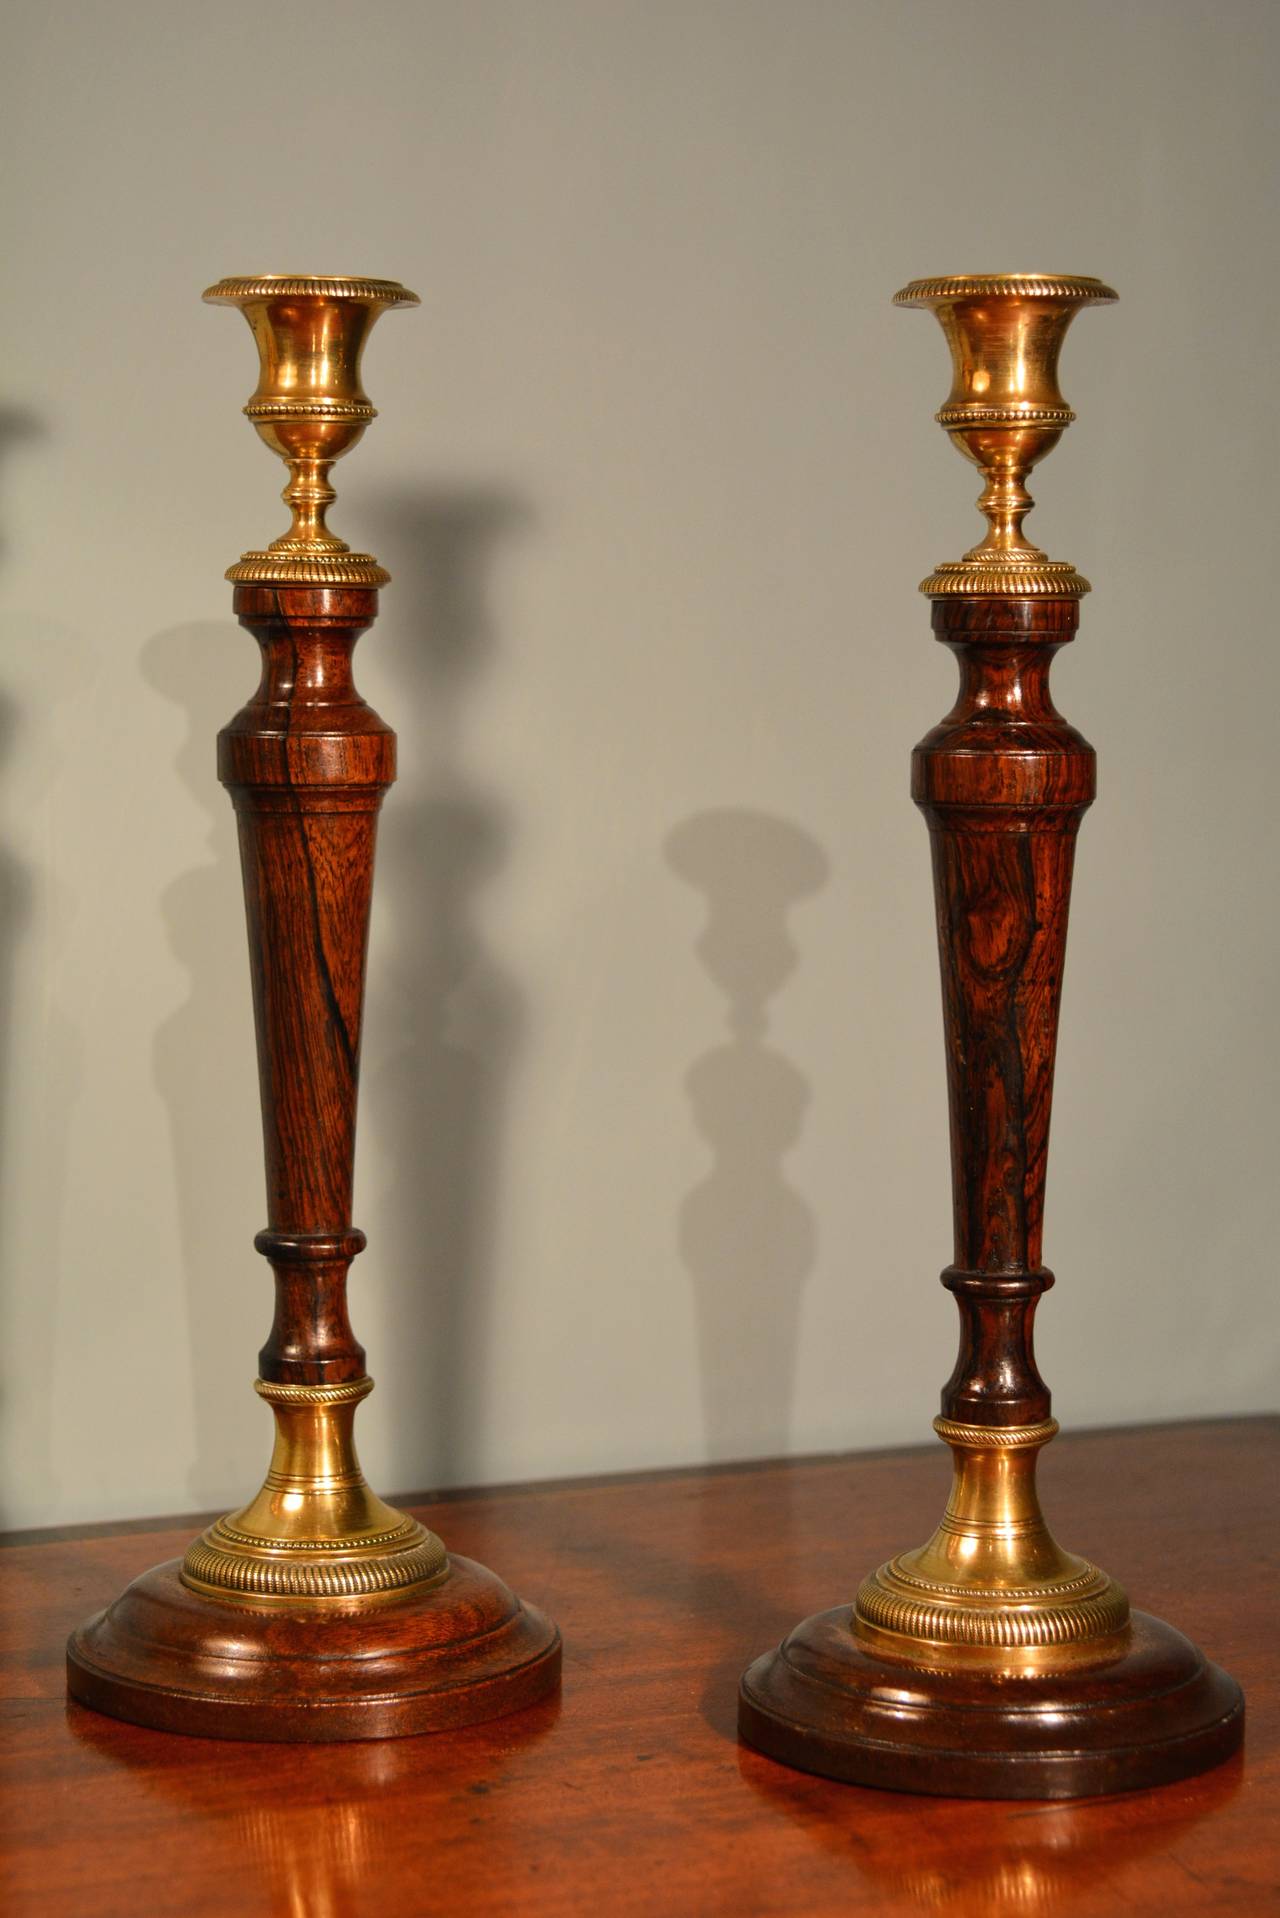 A fine pair of late 18th century candlesticks. The turned mahogany bases having a large milled lacquered brass collar, the turned rosewood stem surmounted by a turned milled lacquered brass sconce. These candle sticks have excellent colour and